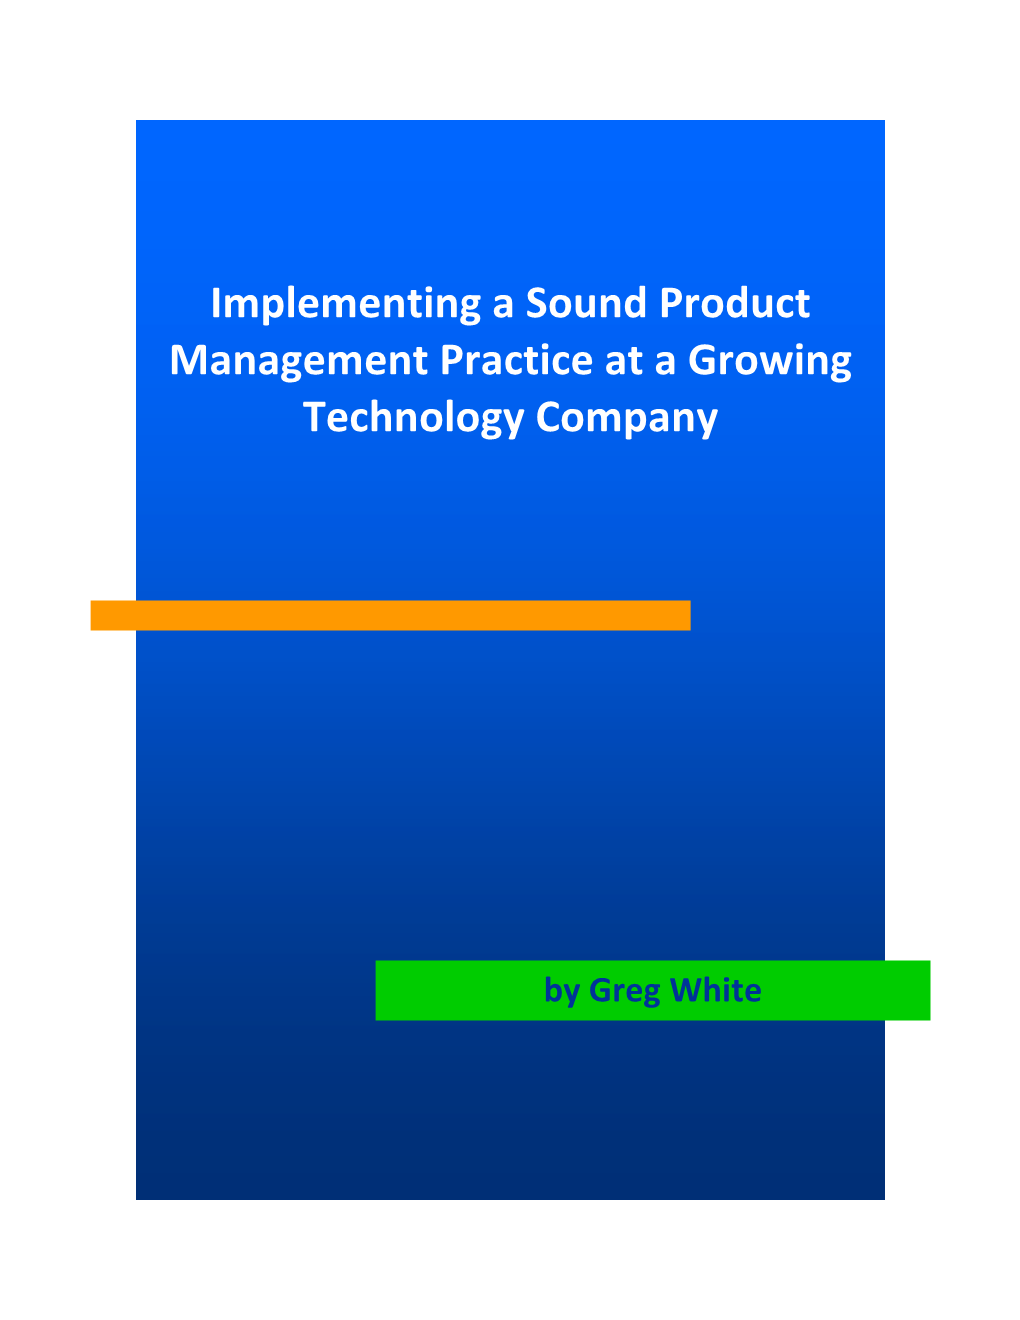 Implementing a Sound Product Management Practice at a Growing Technology Company